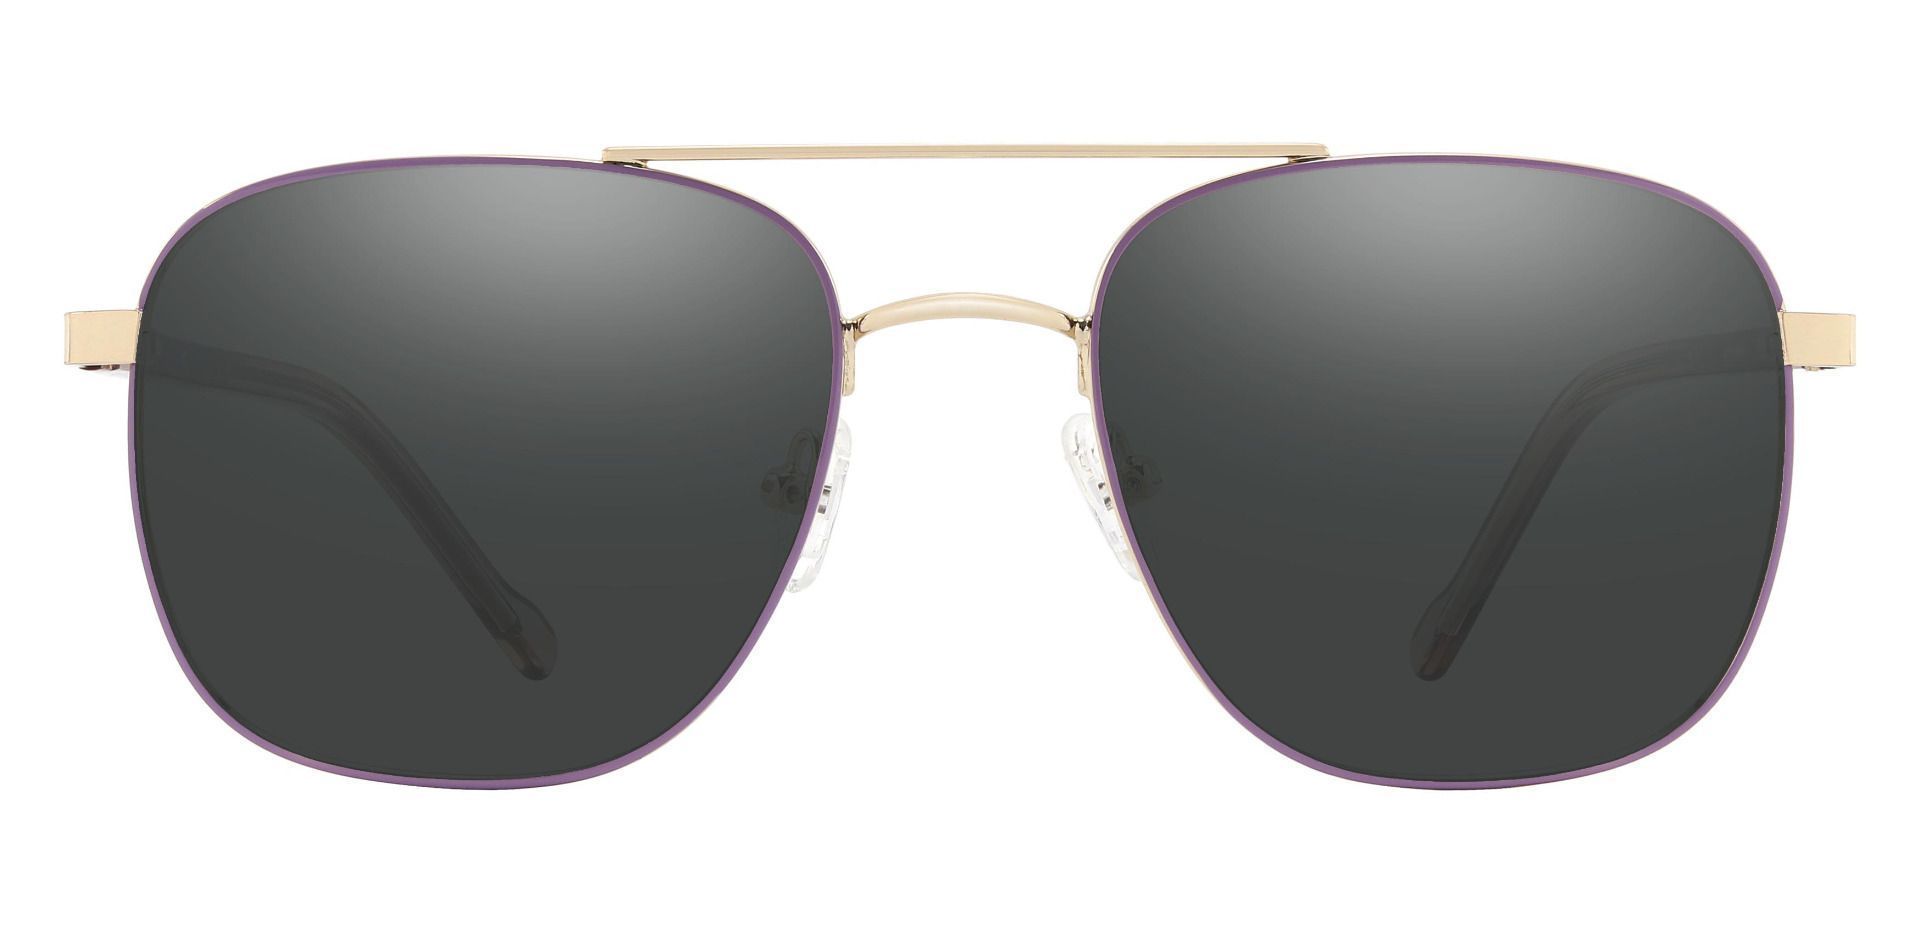 Howell Aviator Non-Rx Sunglasses - Purple Frame With Gray Lenses